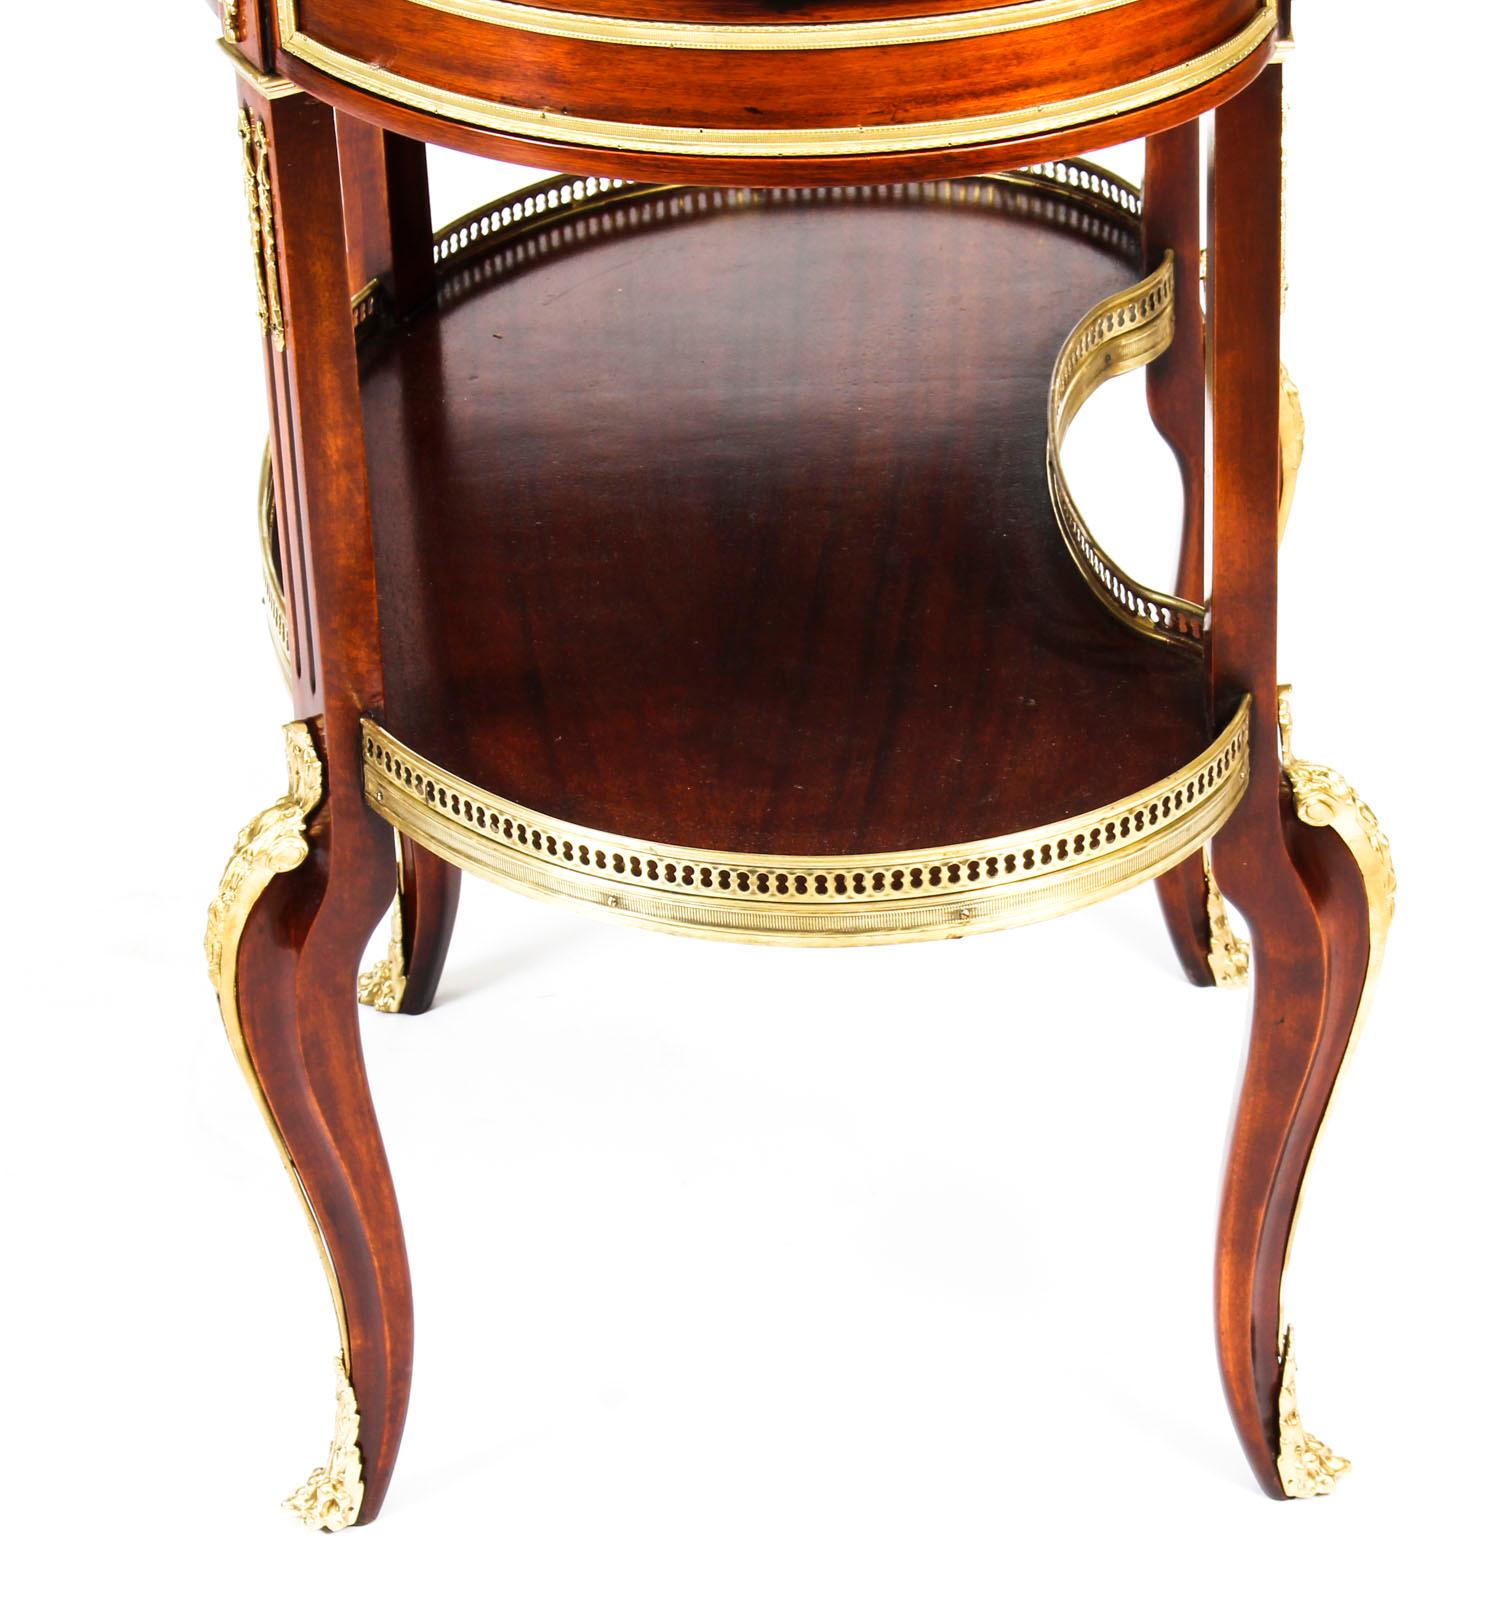 French Louis XVI Revival Kidney Shaped Marble-Top Side Table, 19th Century 5